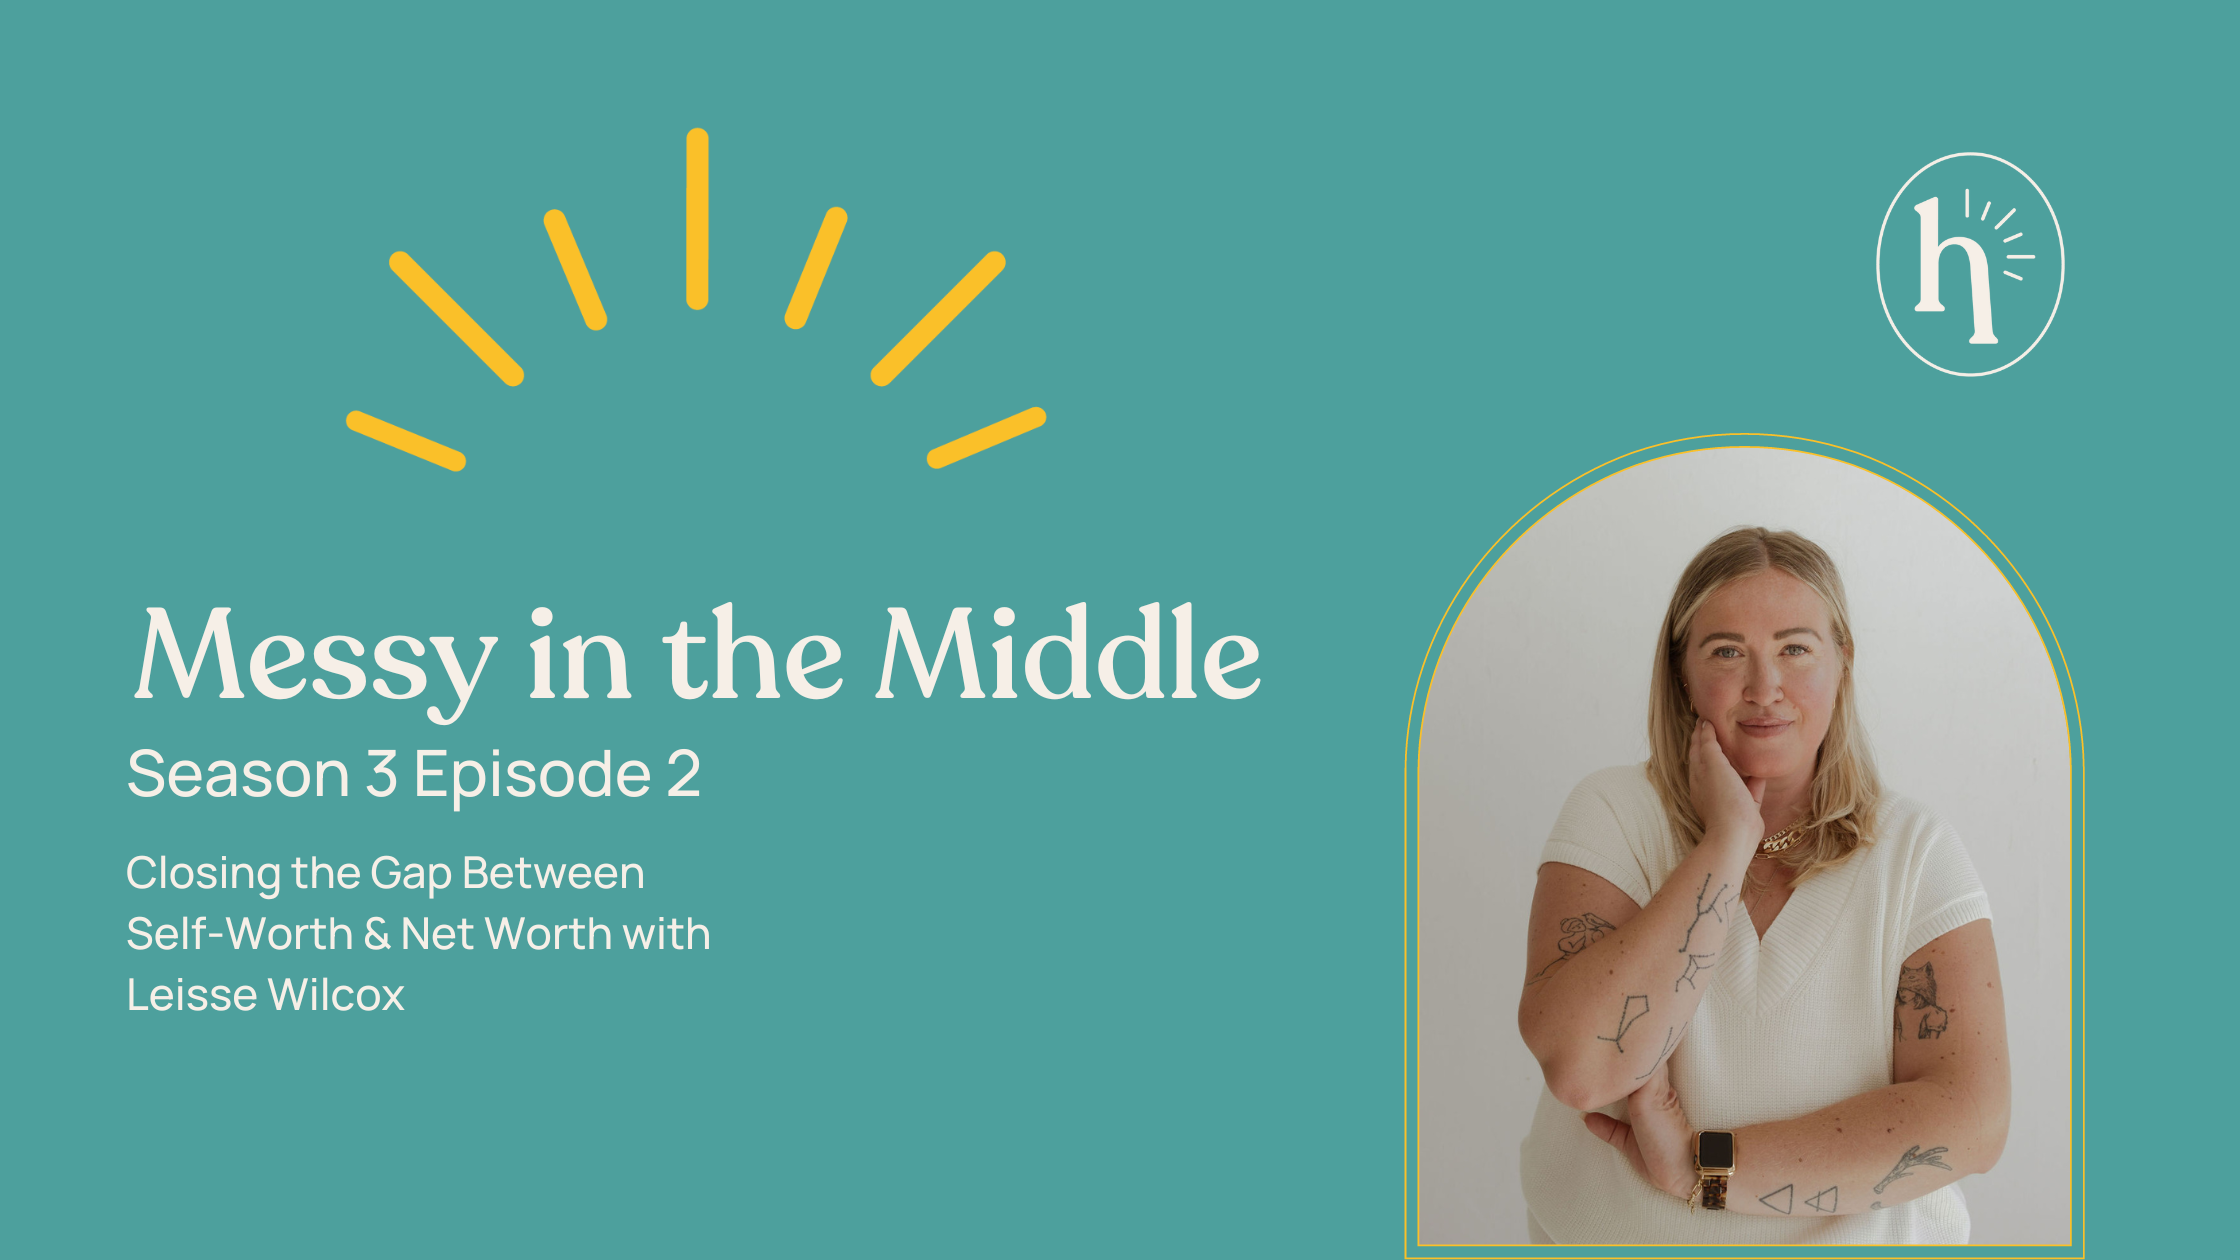 Closing the Gap Between Self-Worth & Net Worth with Leisse Wilcox